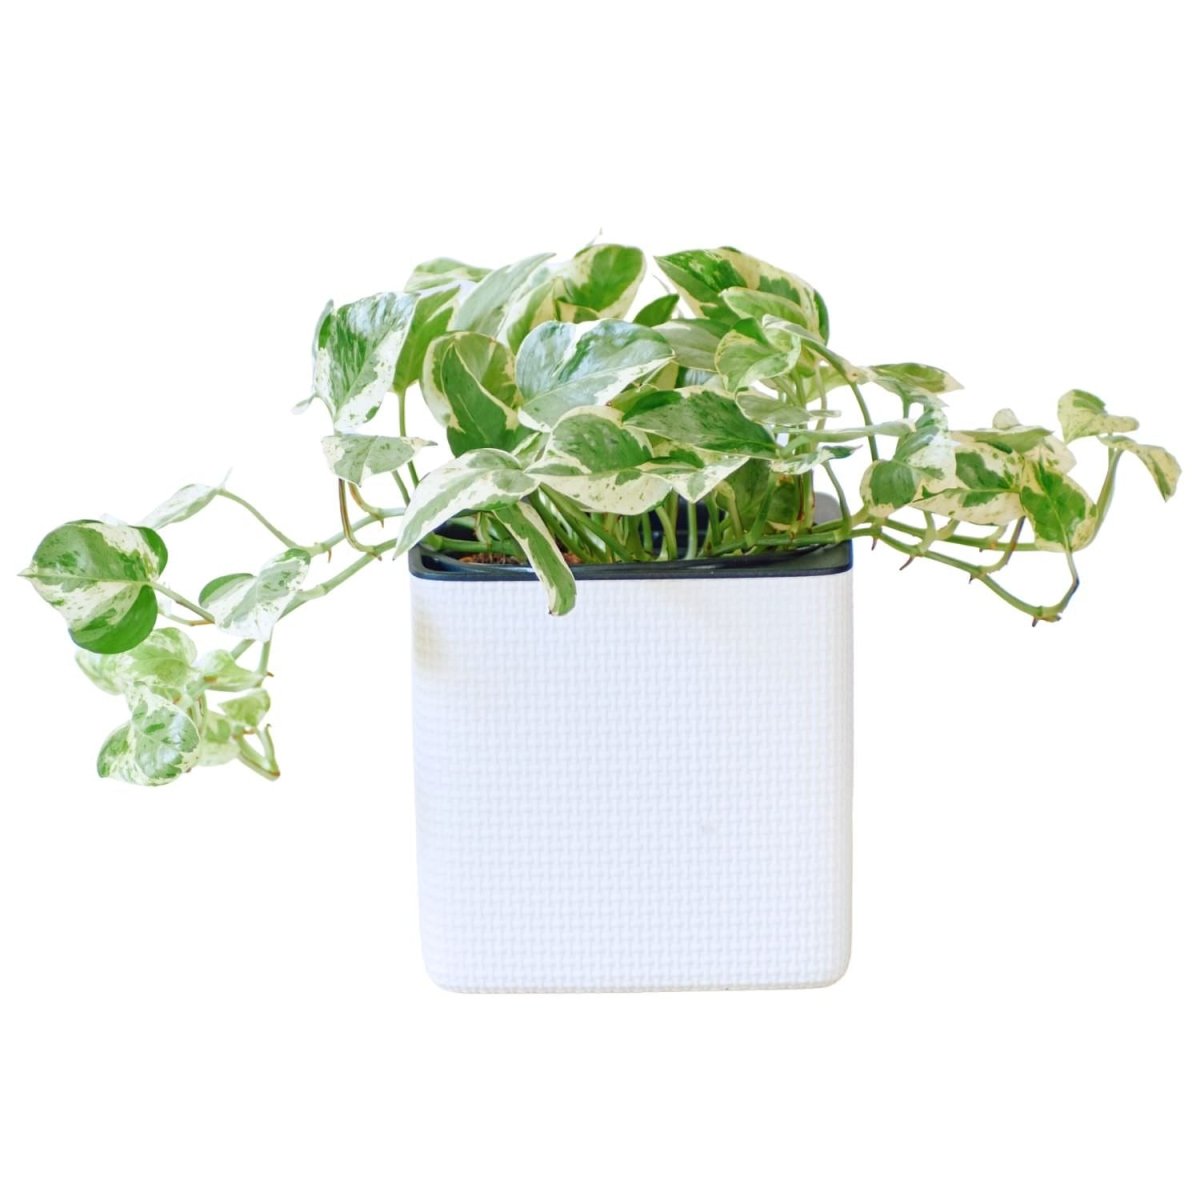 Pothos Pearls And Jade Placed In Lechuza Cube 16 Planter - White - My City Plants